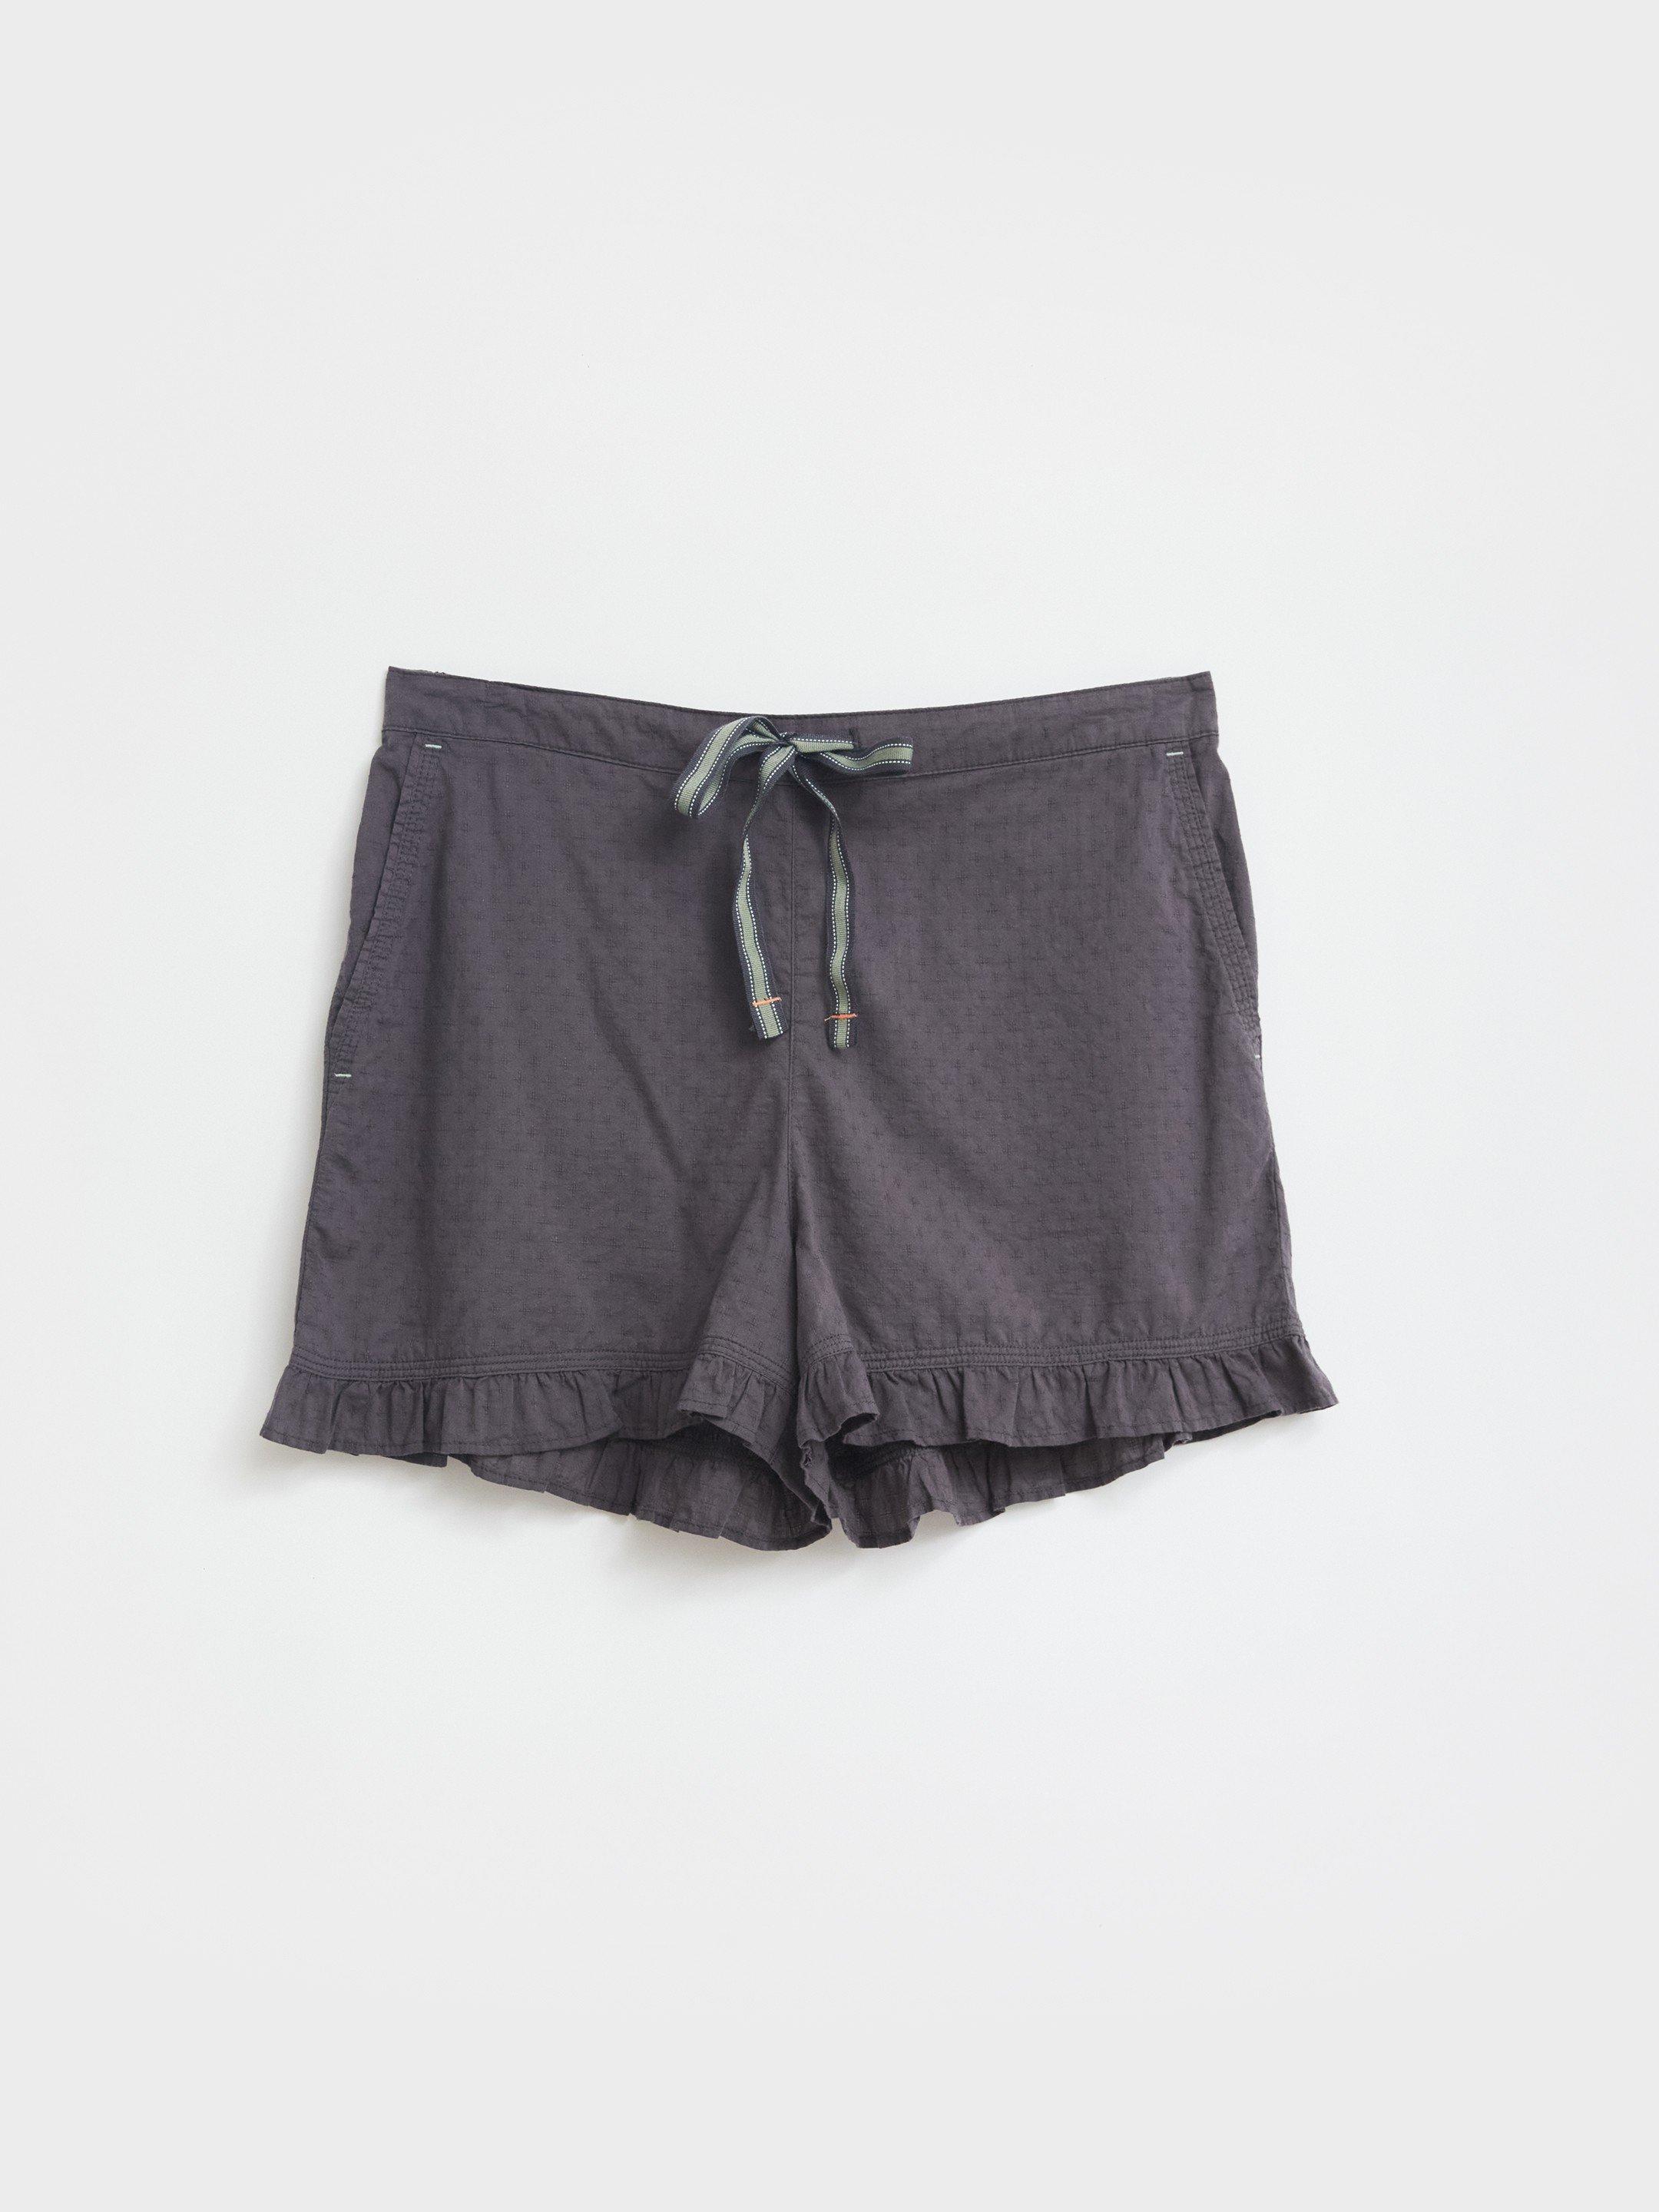 Fiona Frill PJ Short in WASHED BLK - FLAT FRONT